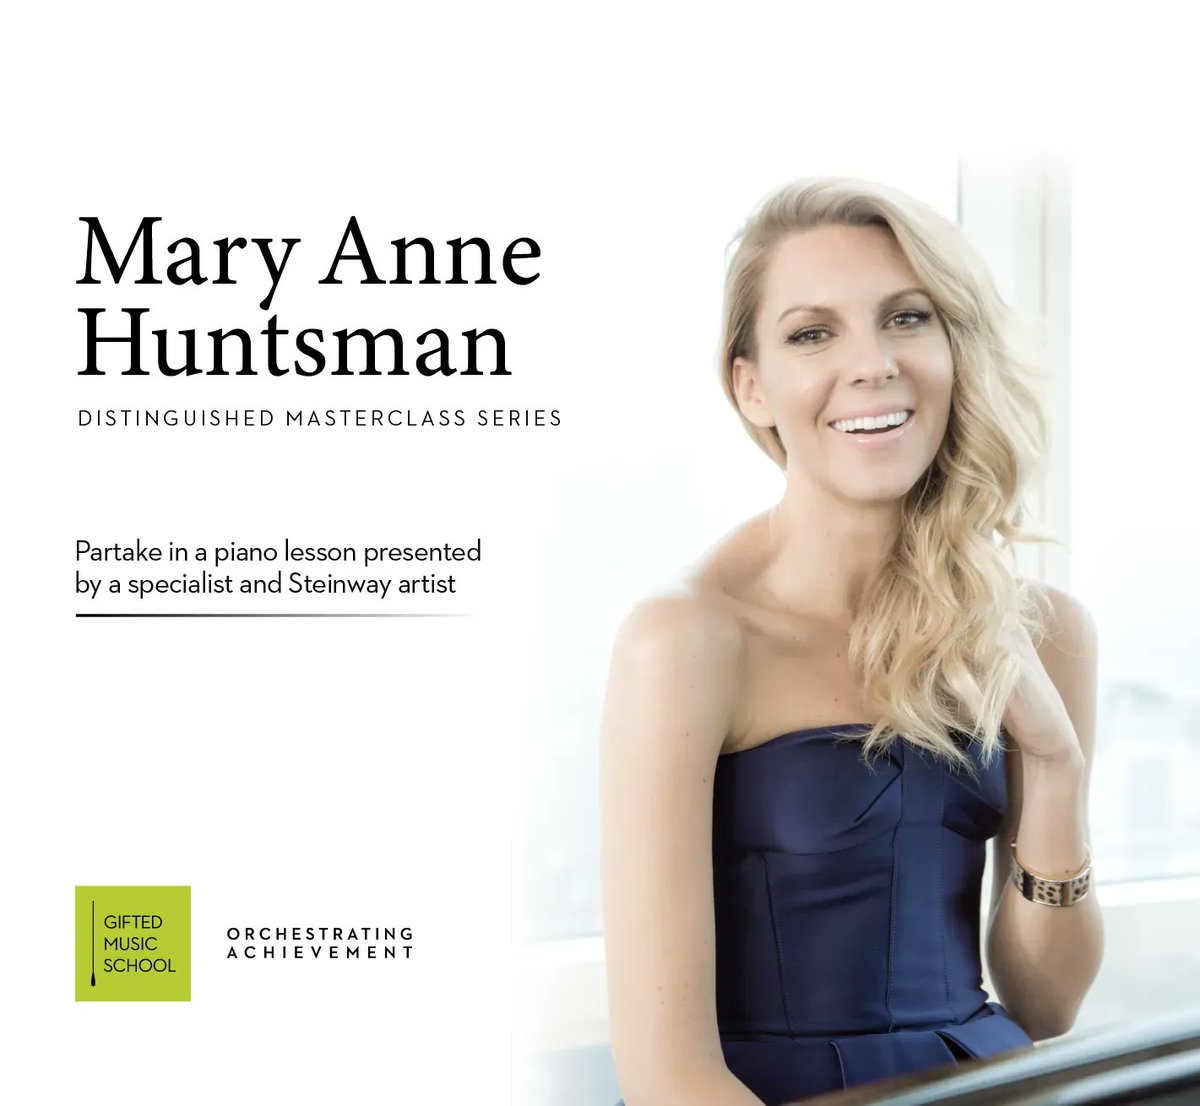 Don't miss this masterclass from one of the most exciting pianists of her generation! Mary Anne Huntsman will be giving a free masterclass tomorrow, April 8th from 4-6pm at the Gifted Music School. More info at the link below. buff.ly/3r6Vgfy